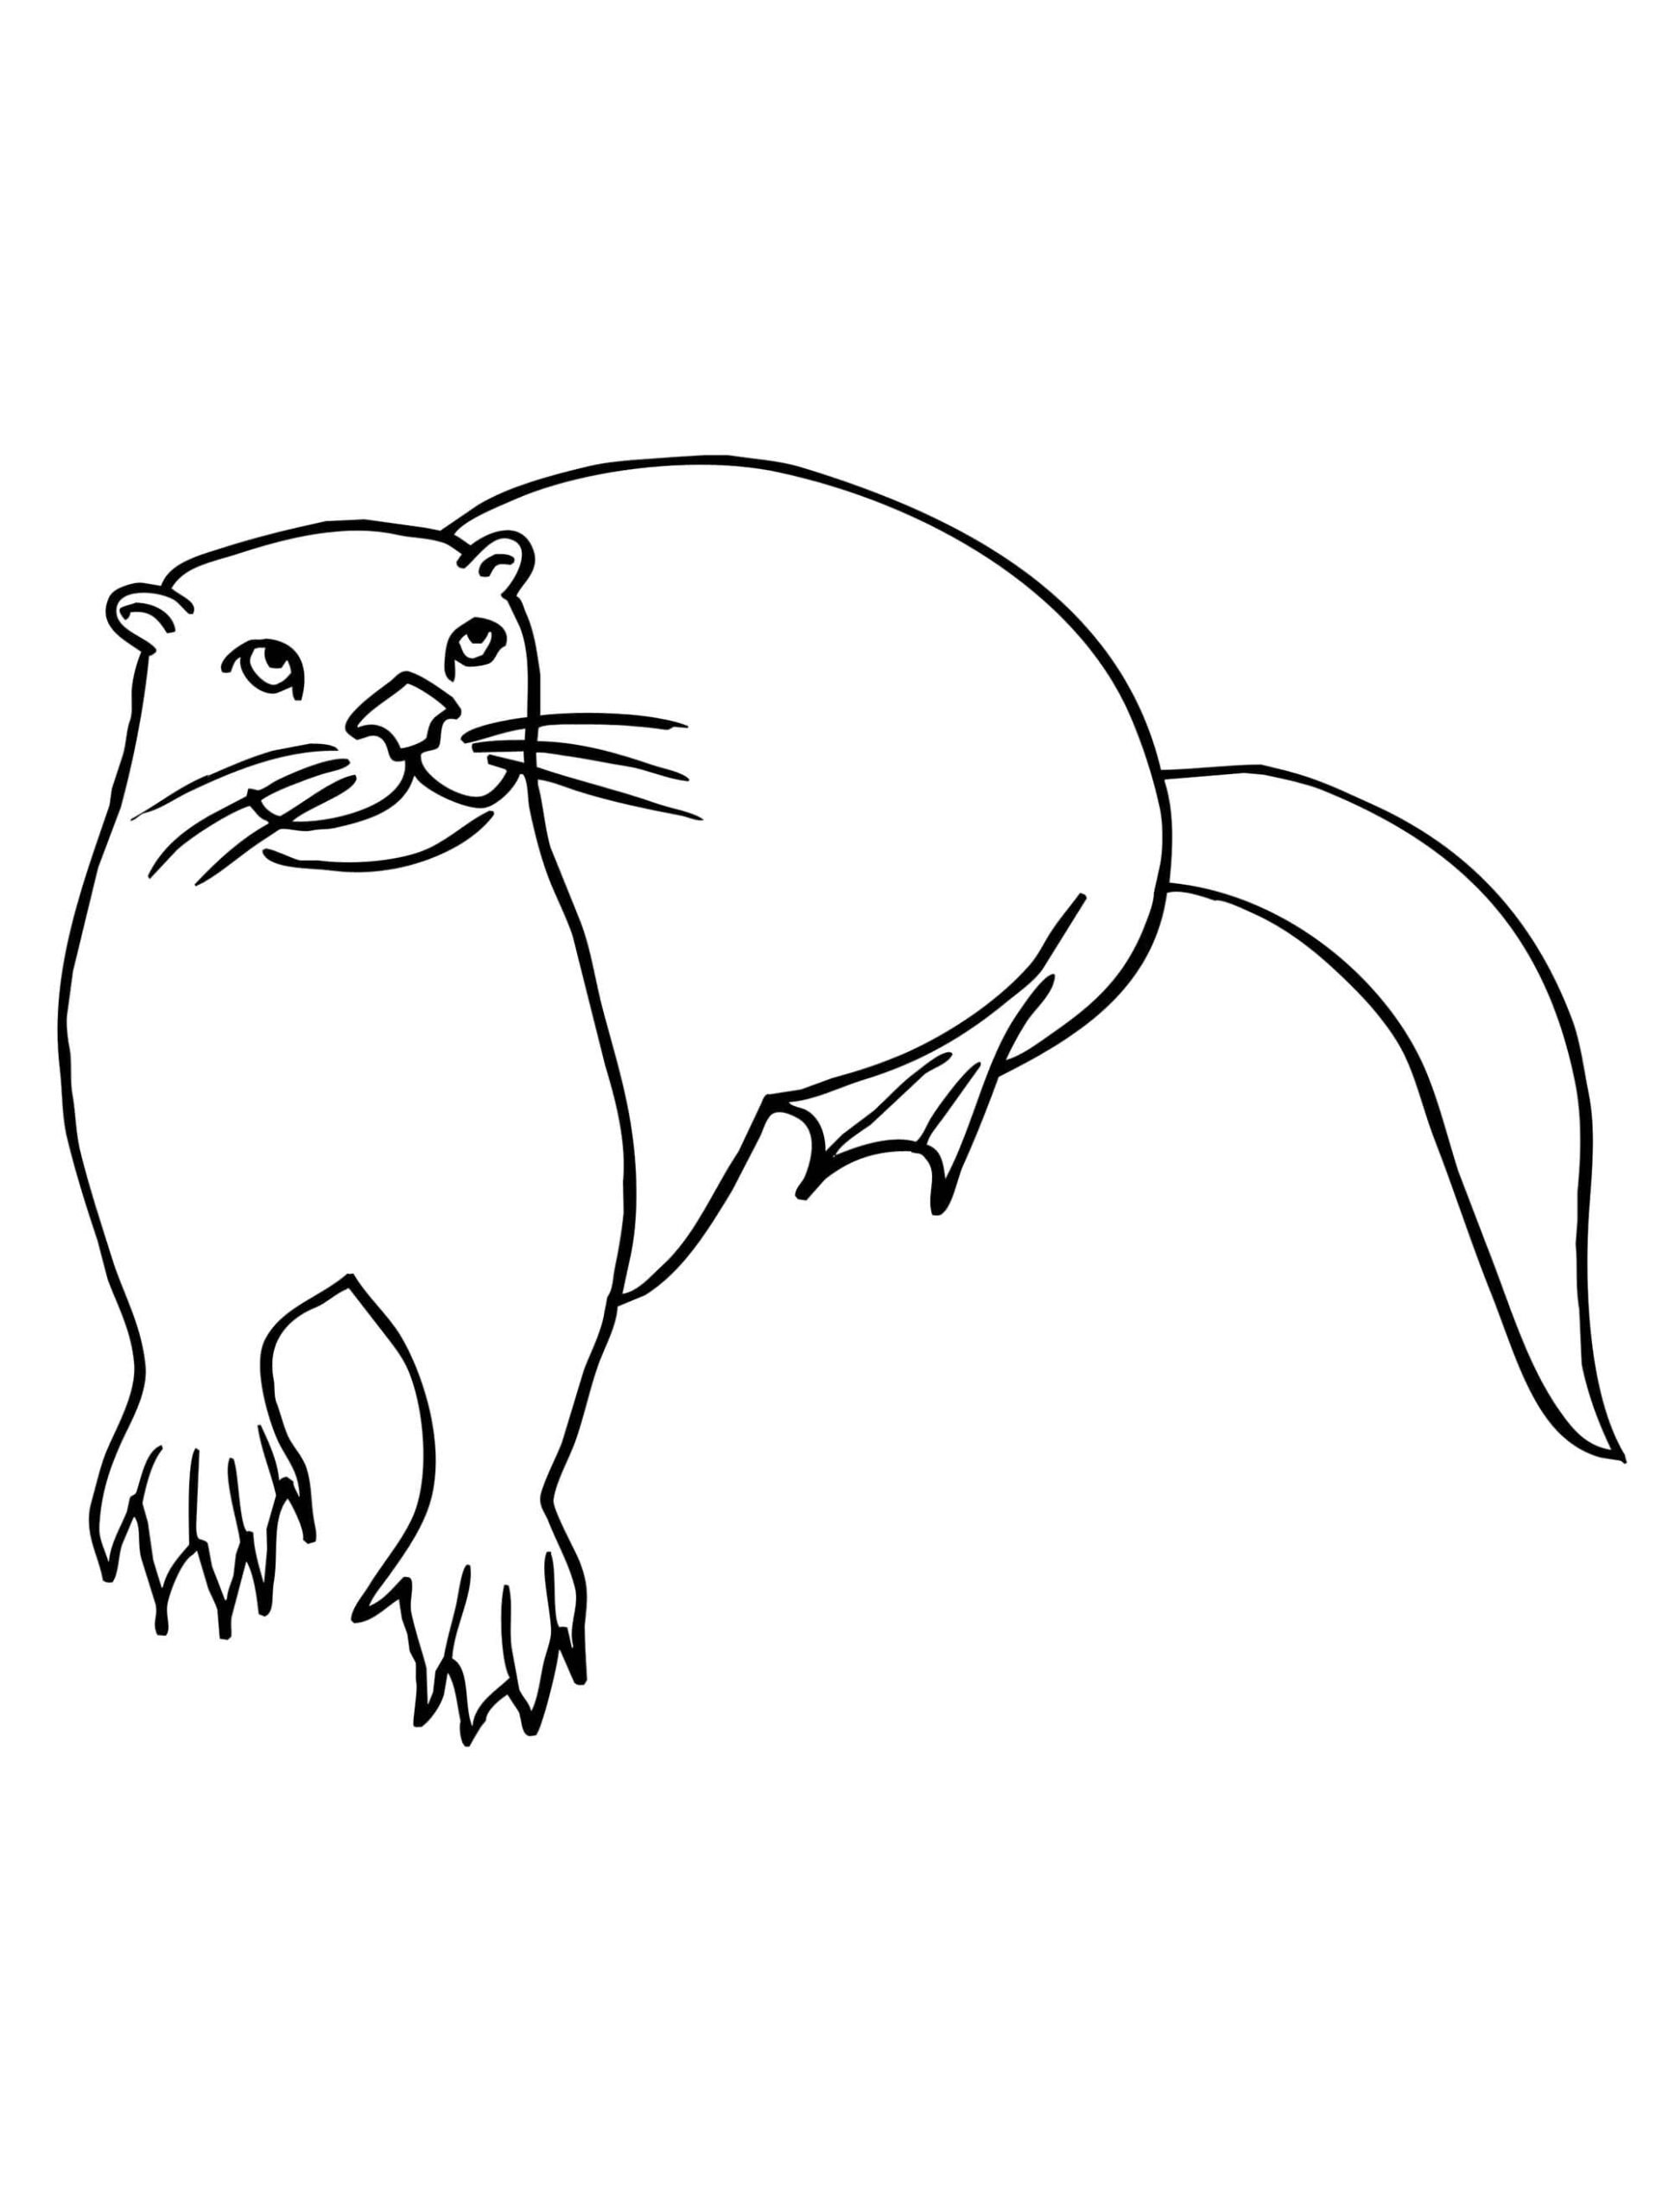 Otter Standing coloring page - Download, Print or Color Online for Free